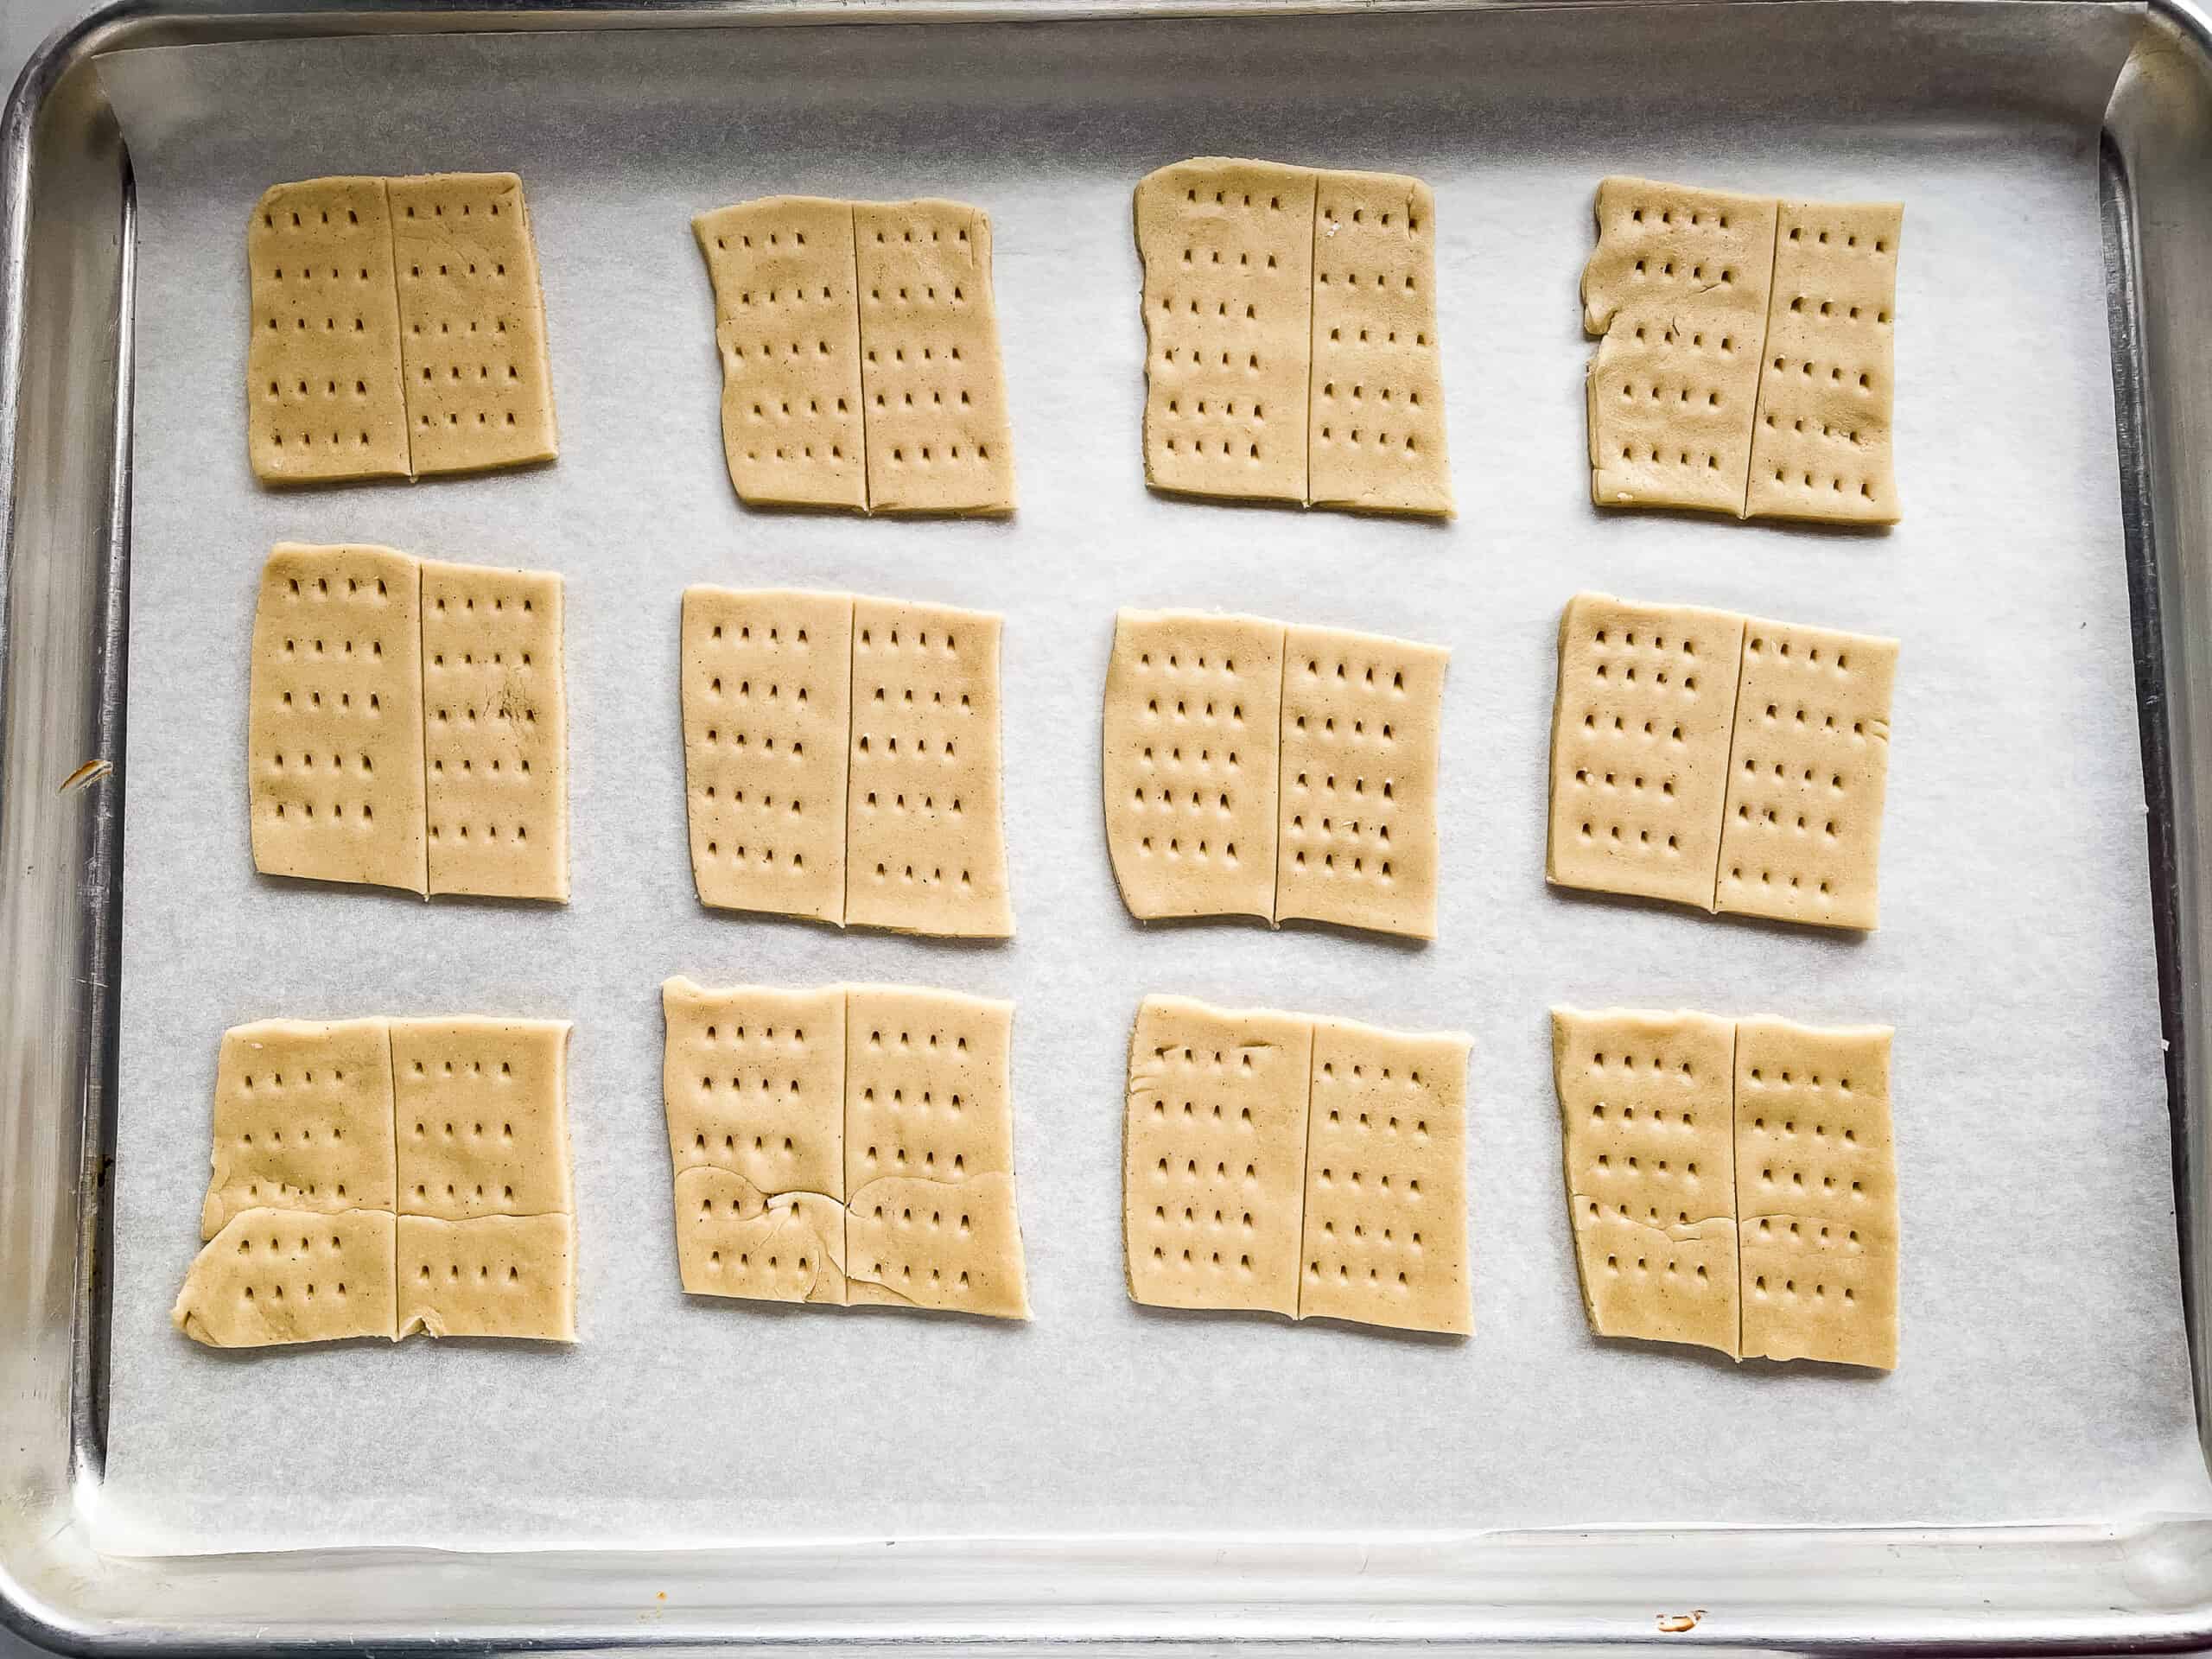 Gluten-free graham crackers cut into squares and dotted with holes.